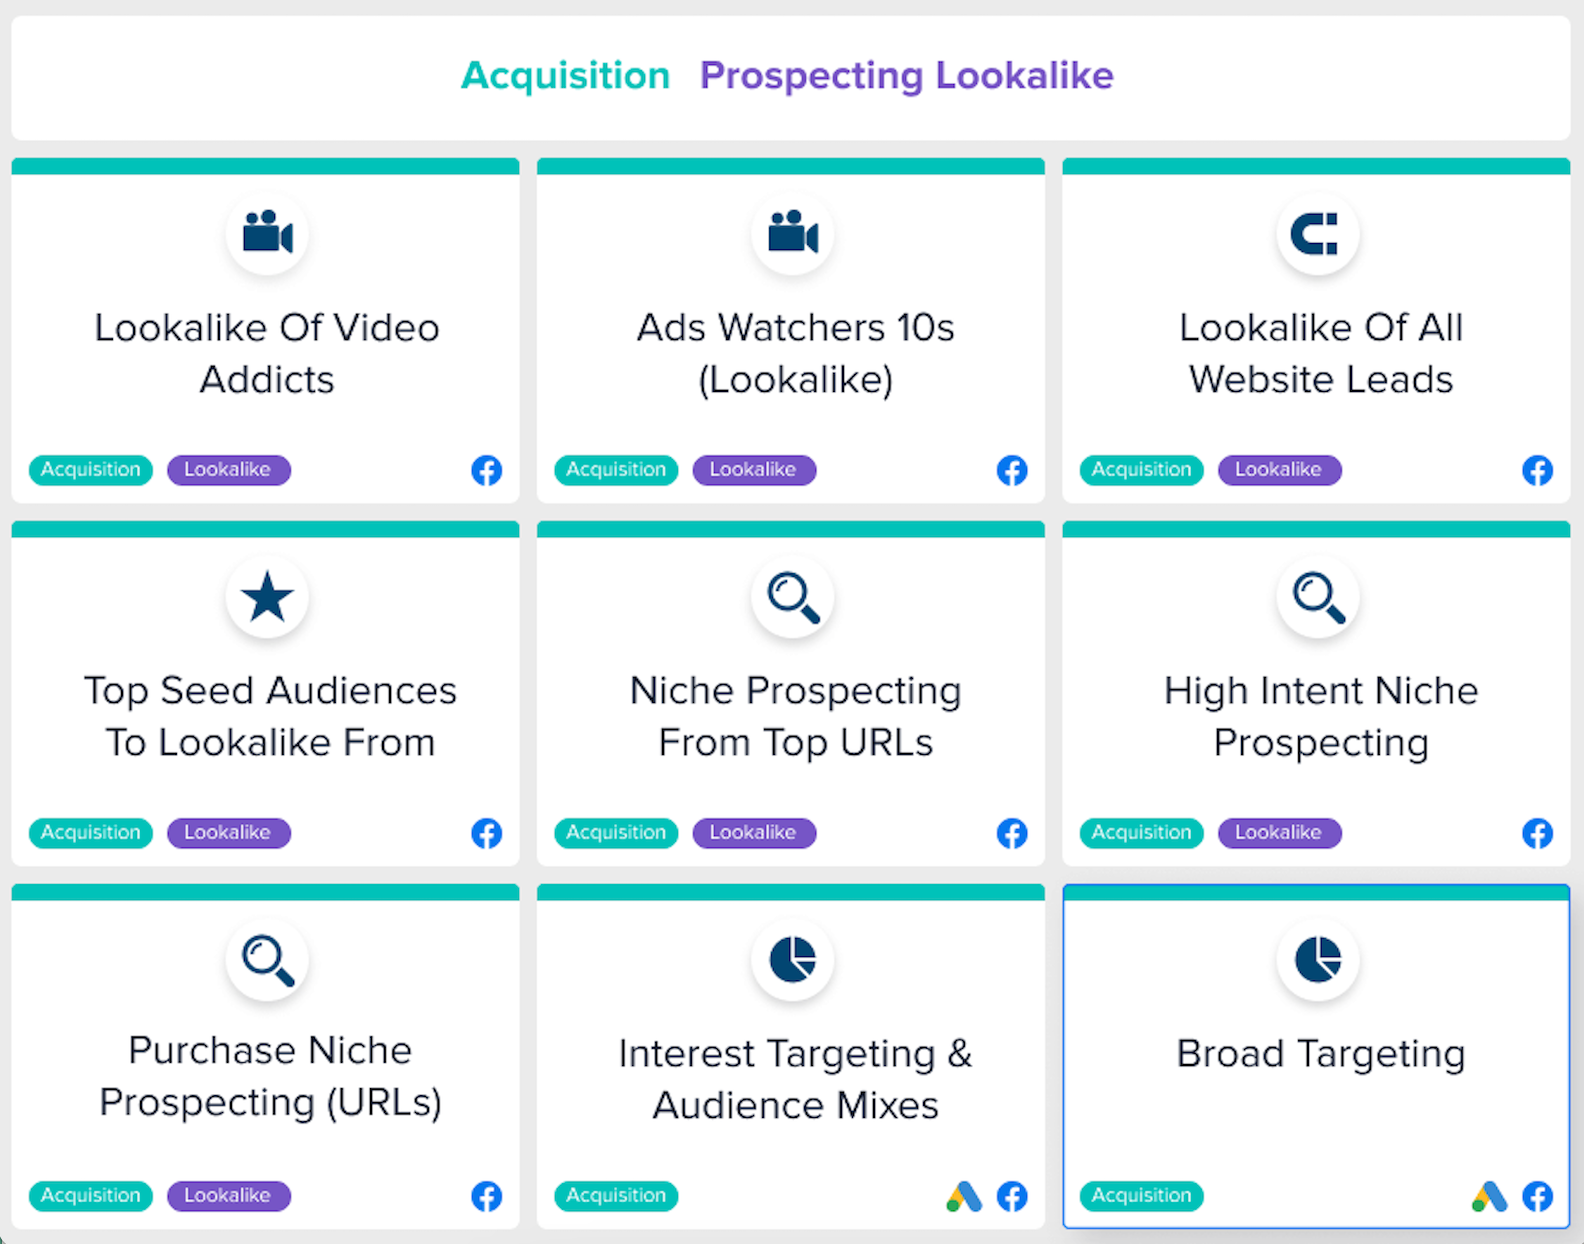 Madgicx Audience Launcher - Prospecting lookalike audiences